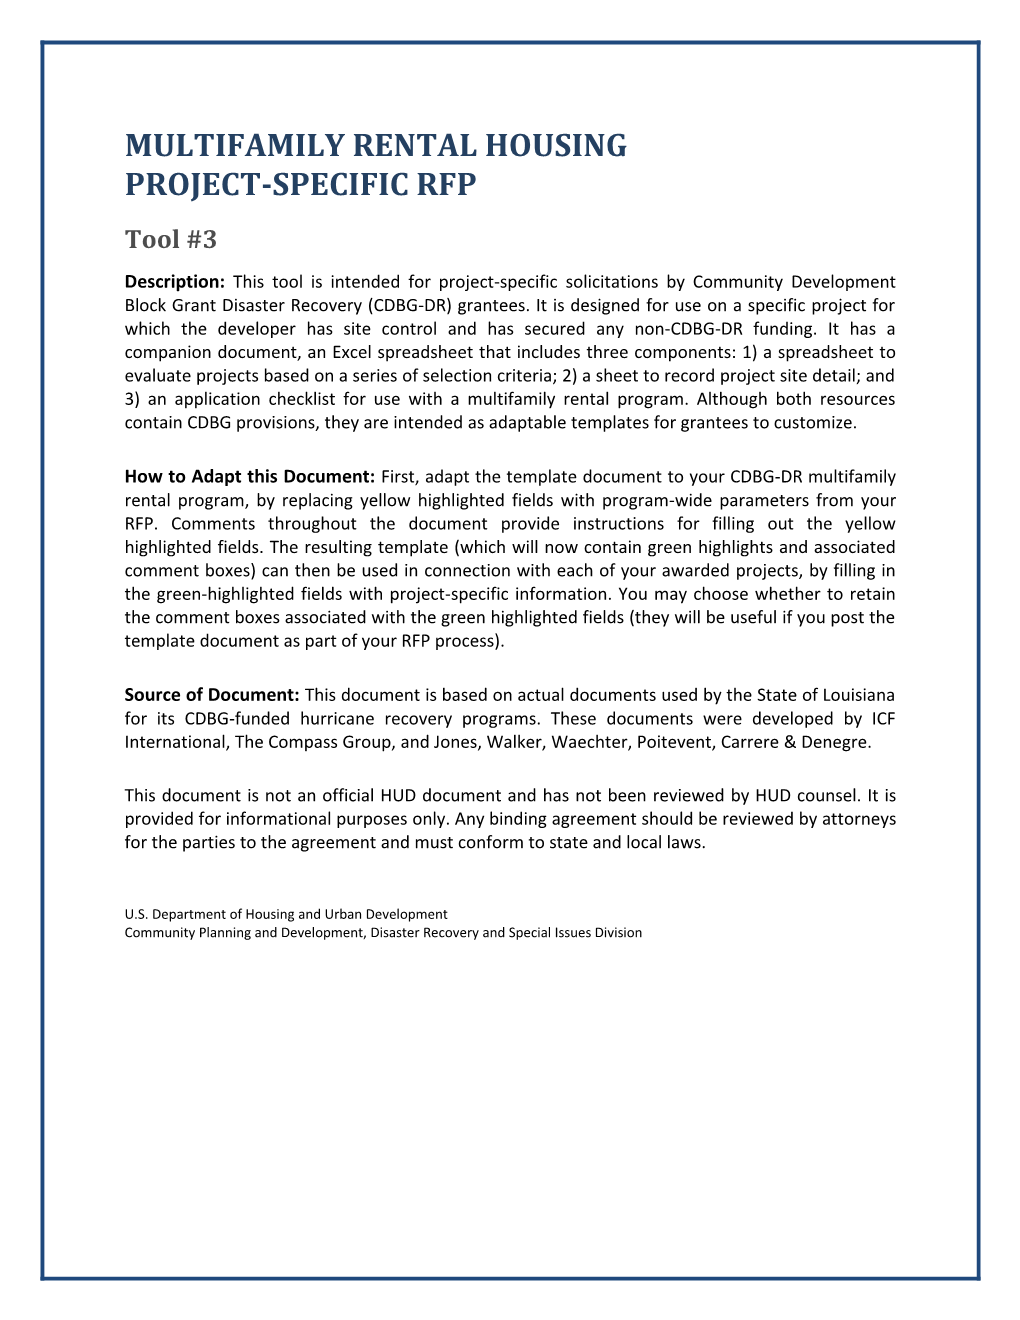 Disaster Recovery Multifamily Rental Project Specific RFP